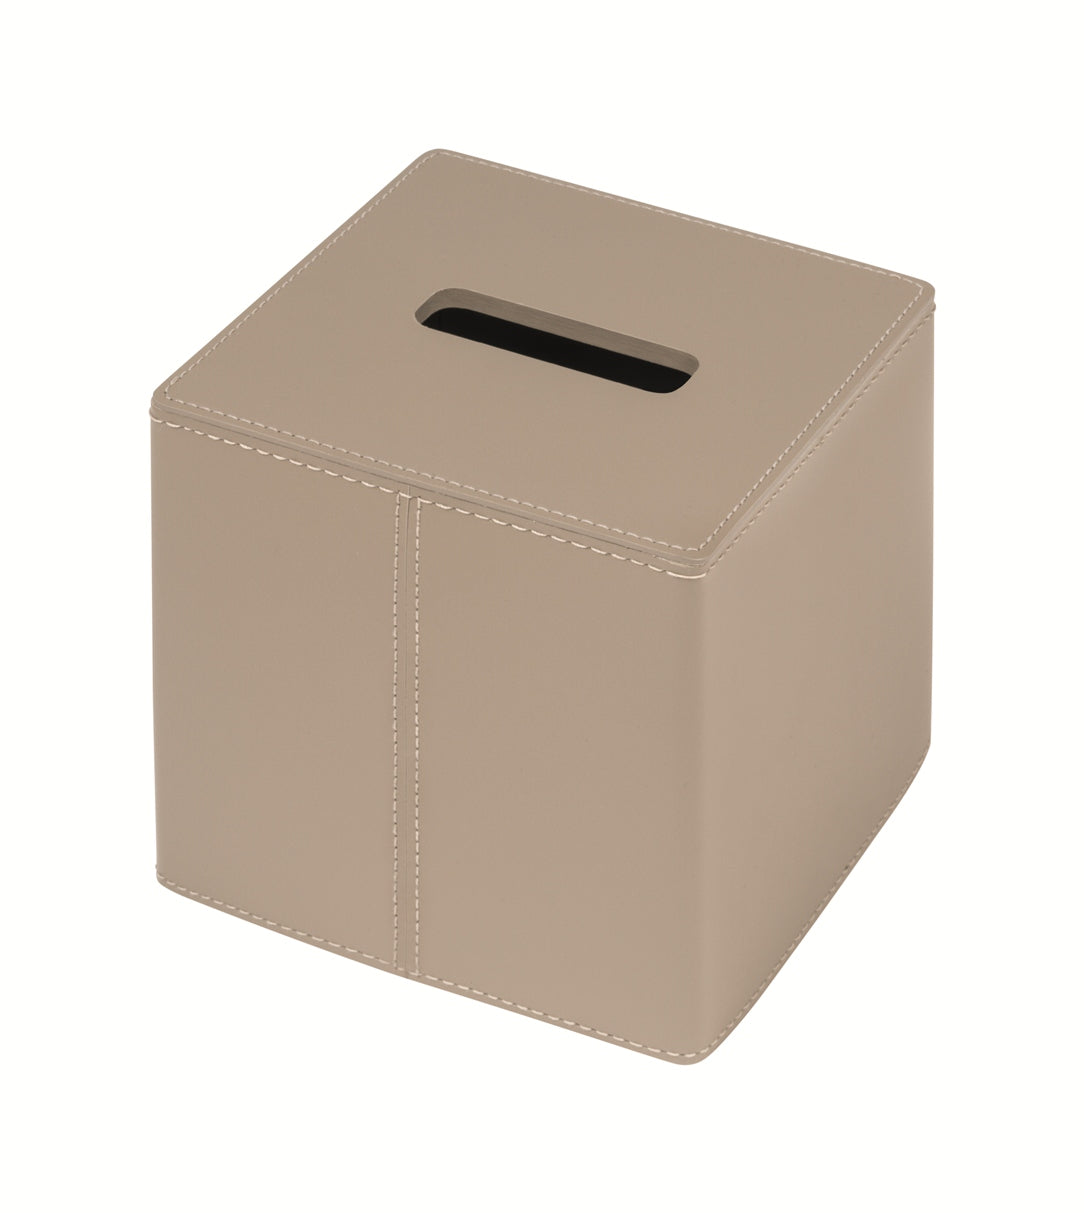 RUDI Narciso Regenerated Leather Tissue Holder | Sustainable and Stylish Design | Perfect for Home Decor | Explore a Range of Luxury Home Accessories at 2Jour Concierge, #1 luxury high-end gift & lifestyle shop